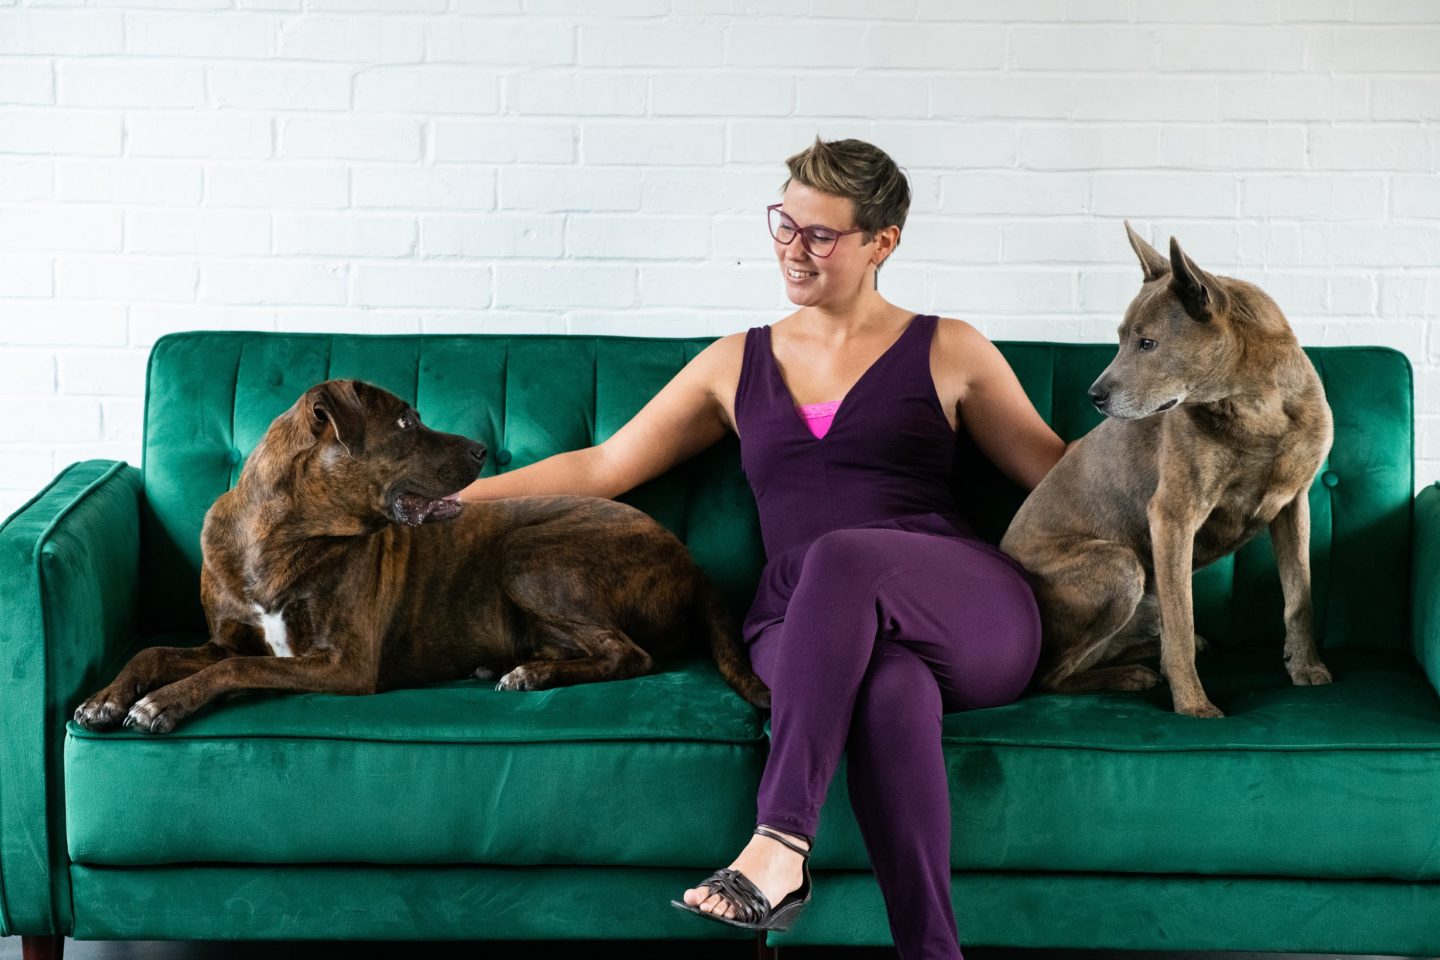 Kristen Kidd’s Woman’s Best Friend Project Gives Women a Platform to Share How their Furry Friend has Impacted Their Life